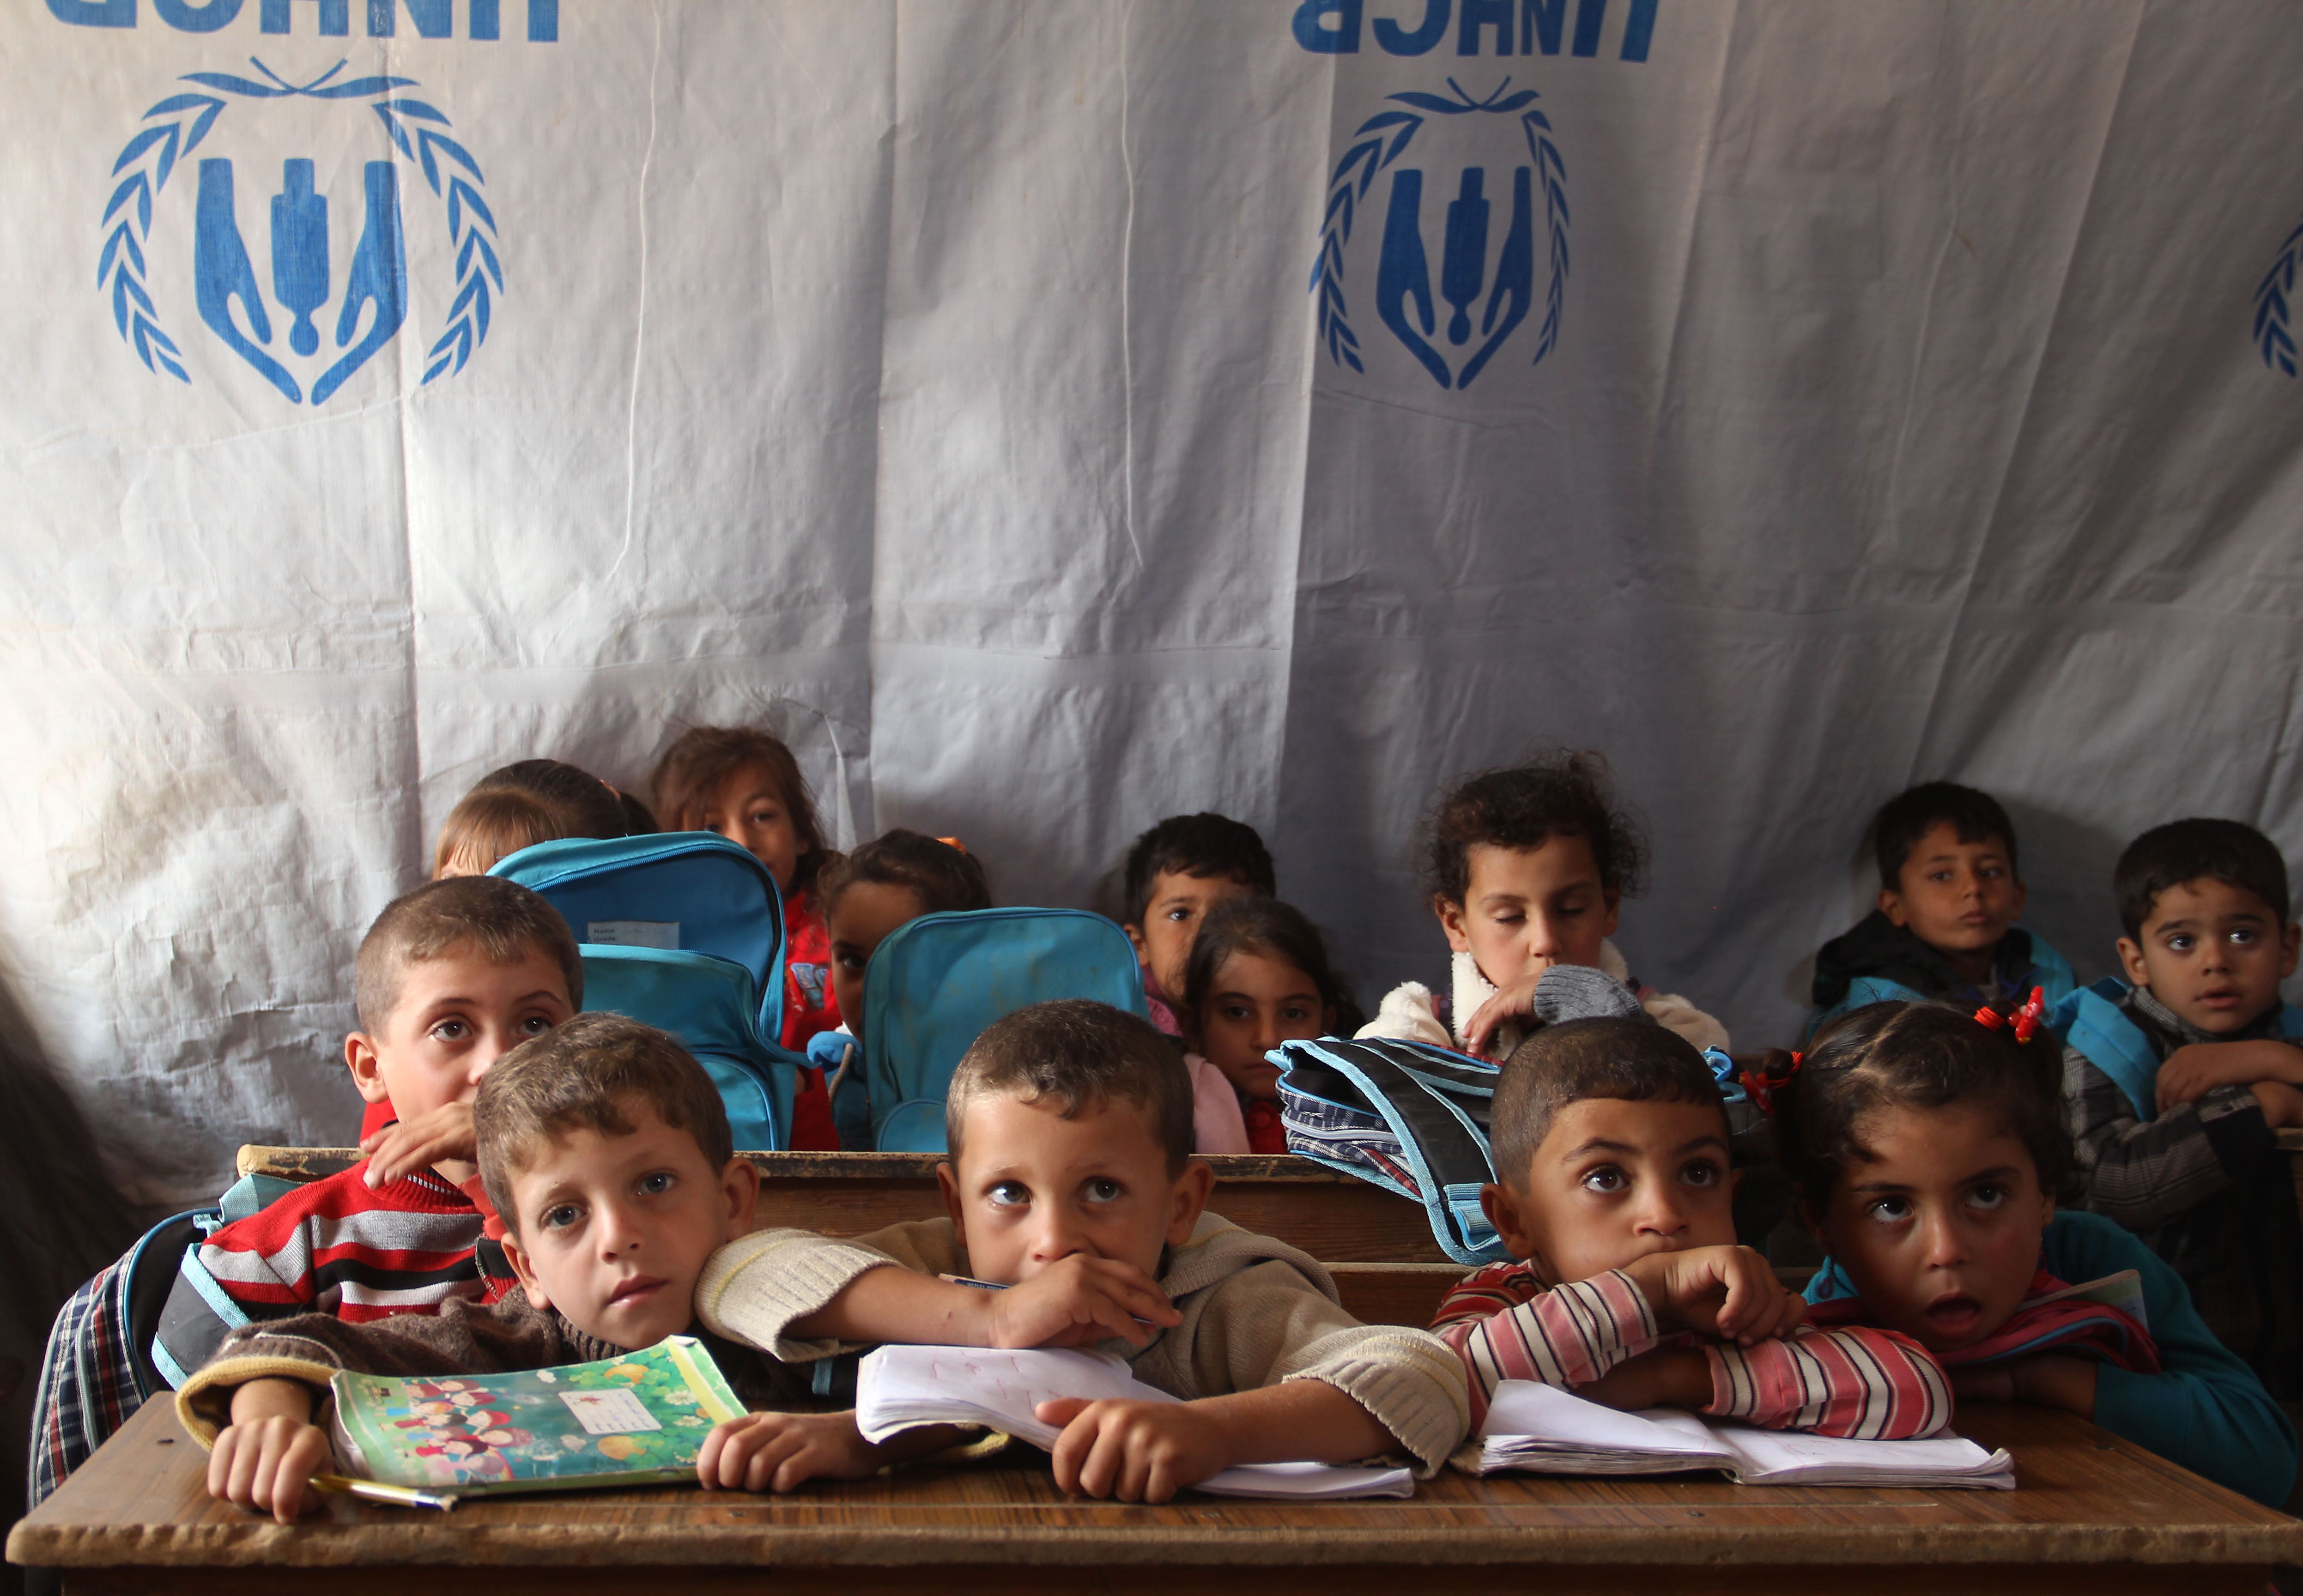 Displaced Syrian children from the town of Daraa, sit at a makeshift school set up in a tent provided the United Nations agency for refugees UNHCR, in the Daraa area in southern Syria, on October 27, 2015. Syrian government forces and rebels fighters have been battling for the control the Daraa area . AFP PHOTO / MOHAMAD ABD ABAZID